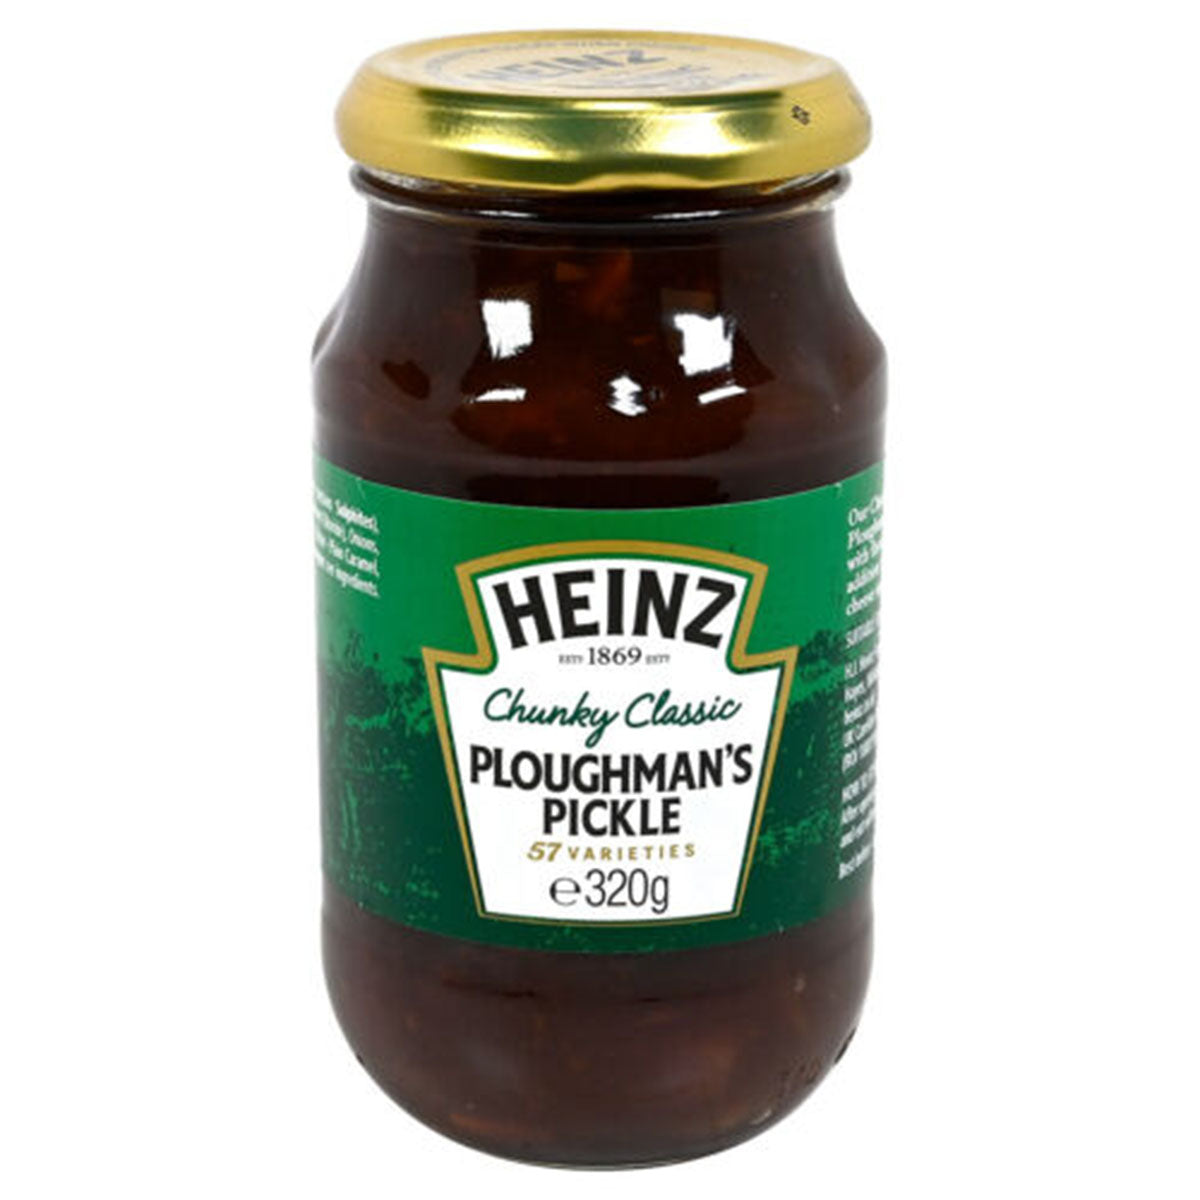 Heinz - Ploughman's Pickle - 320g - Continental Food Store